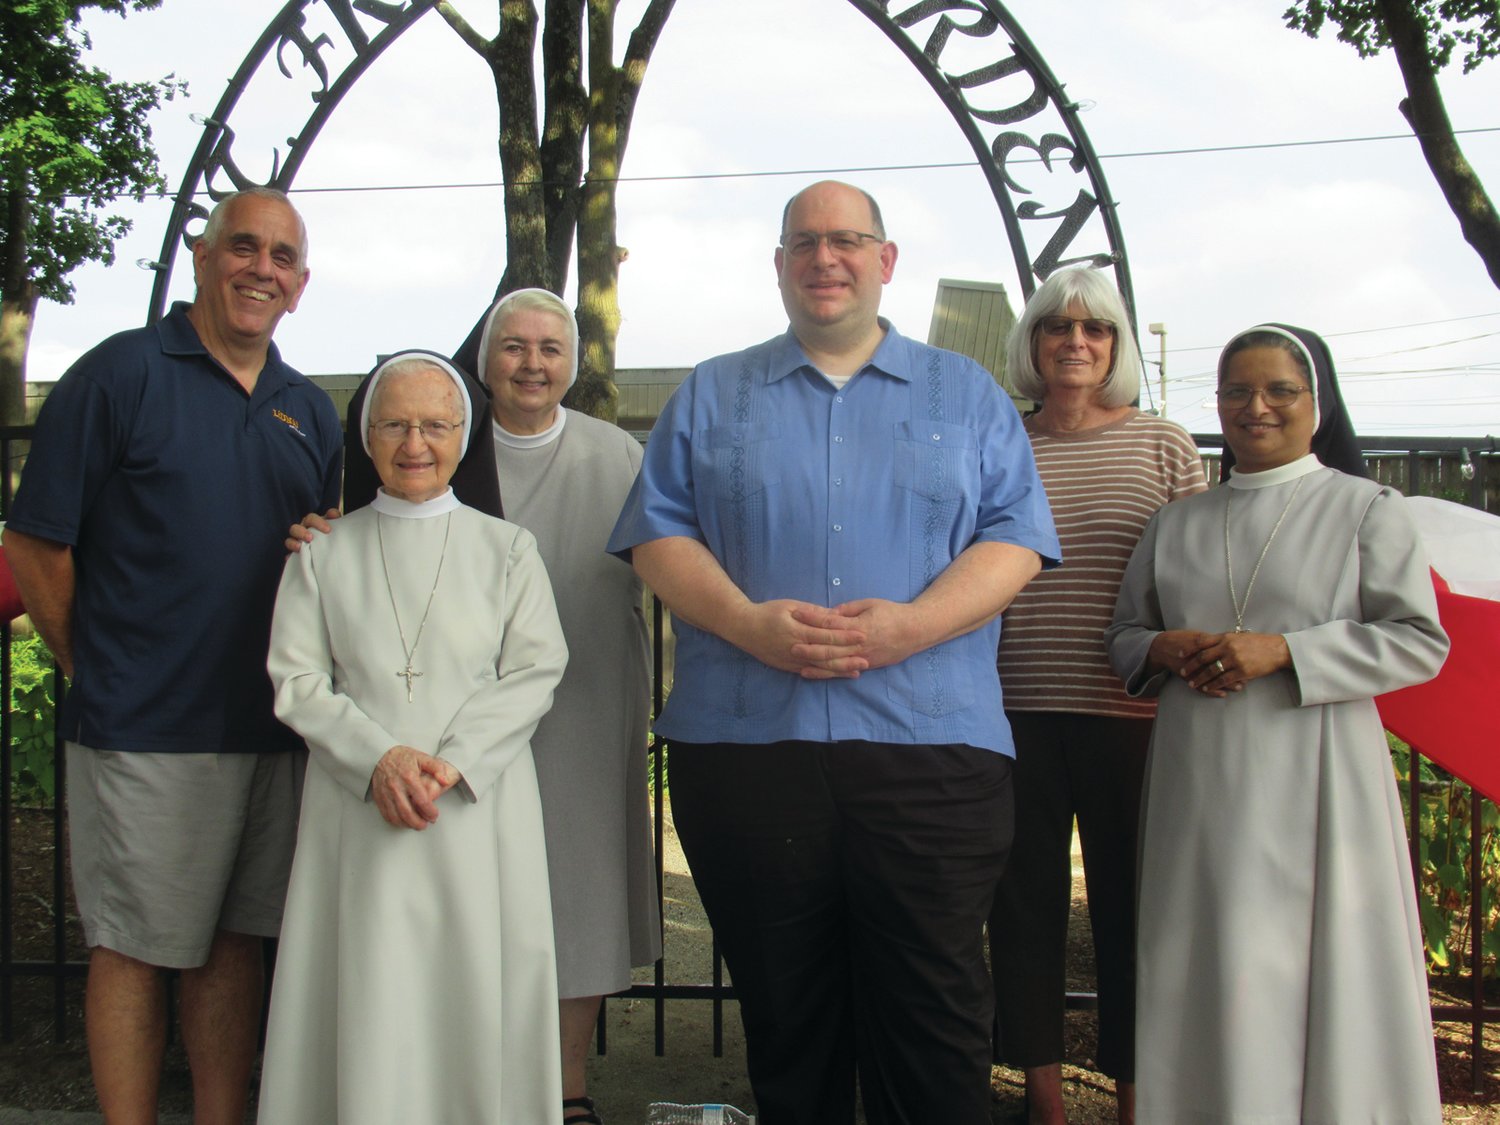 FESTIVAL FOLKS: Rev. Angelo Carusi is joined by St. Rocco’s Feast and Festival Co- chair Richard Montella, Sisters Donna, Mary Antoinette and Daisy along with Carol Blanchard outside the St. Francis Garden that is decorated with American and Italian flags in honor of this weekend’s 82nd annual fun and food fest.